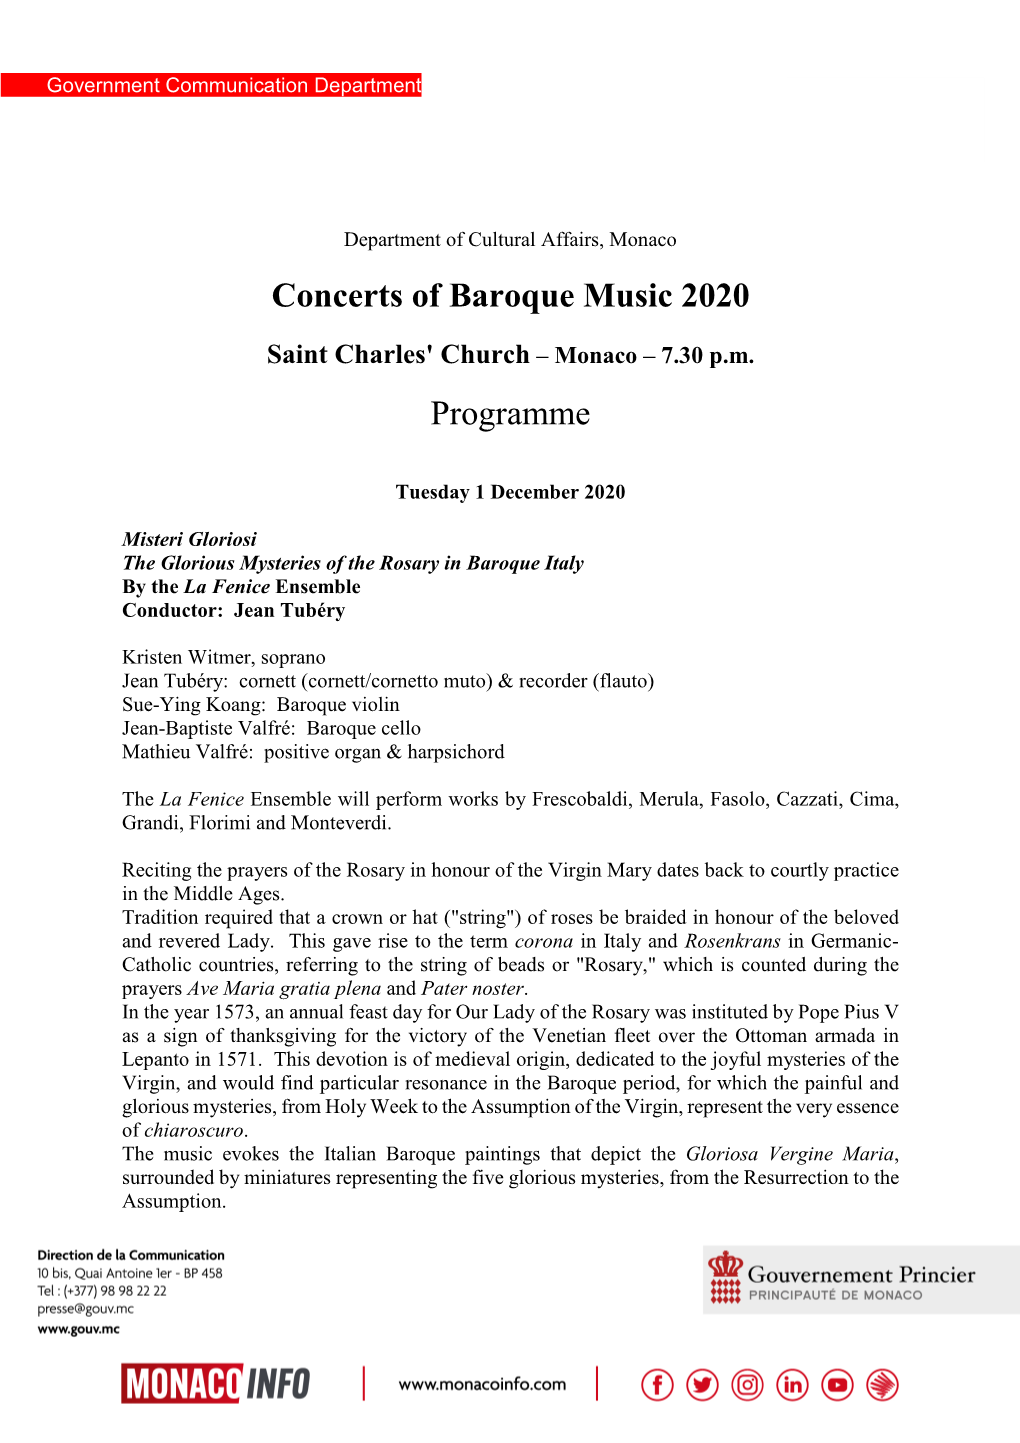 Concerts of Baroque Music 2020 Programme